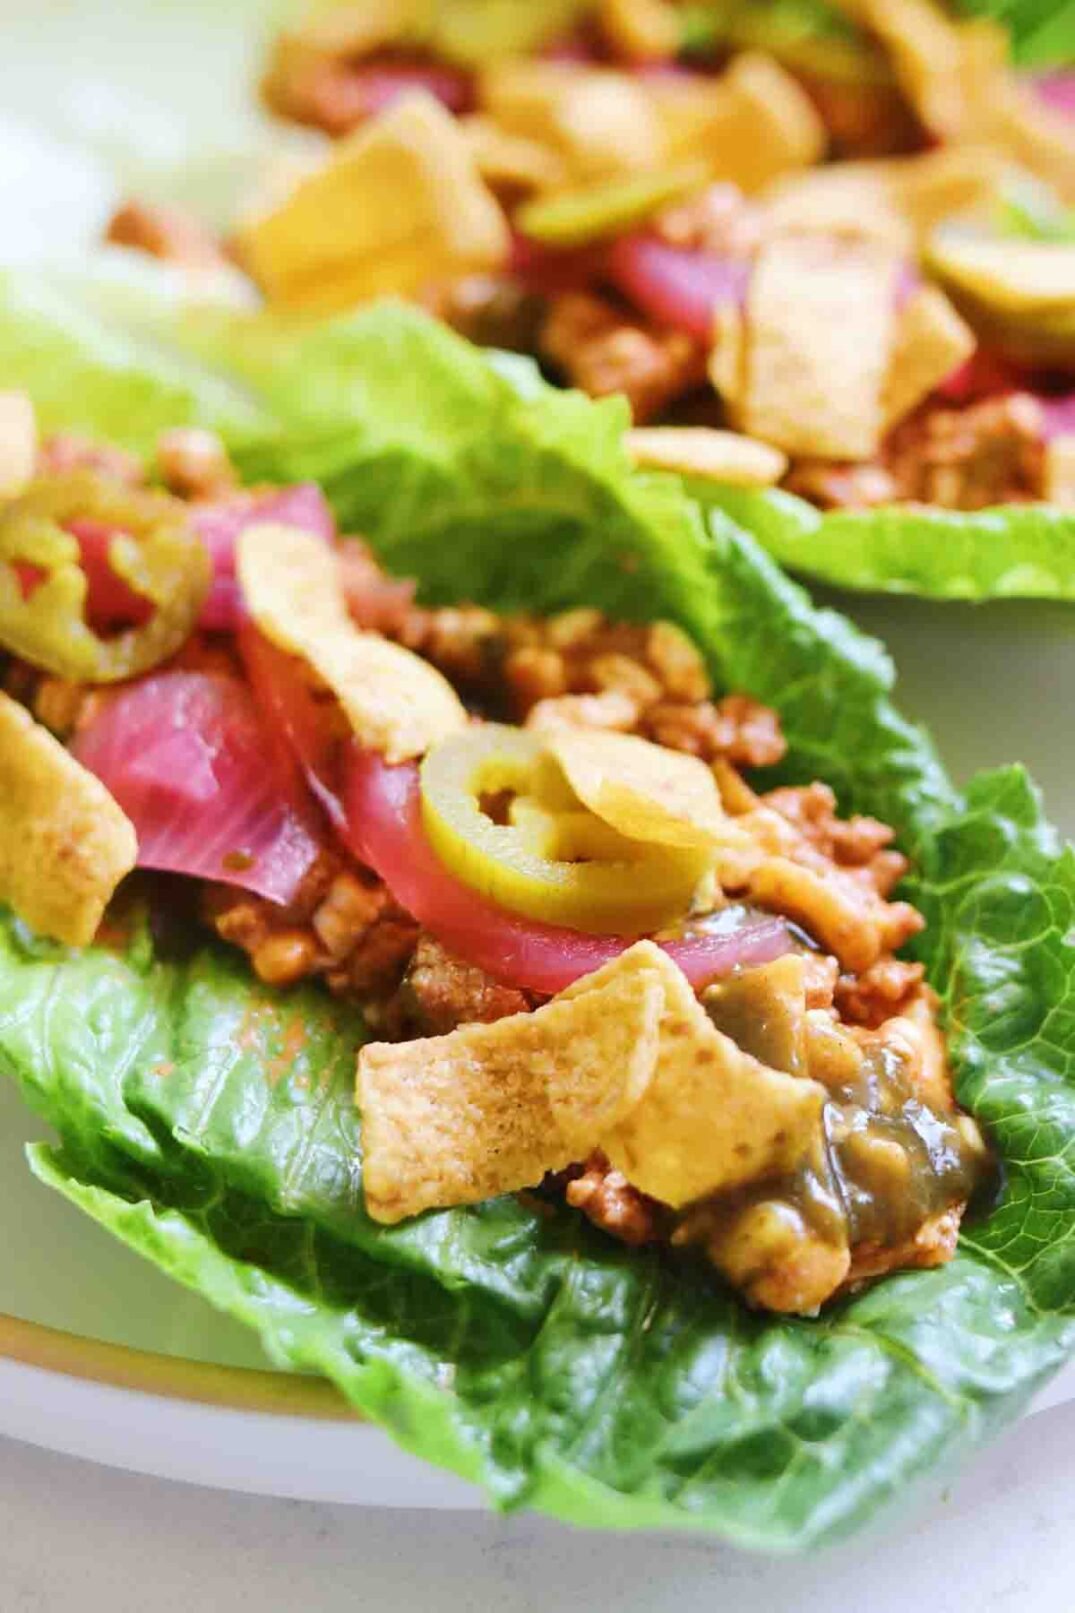 one romaine leaf topped with cottage cheese taco meat and colorful toppings.